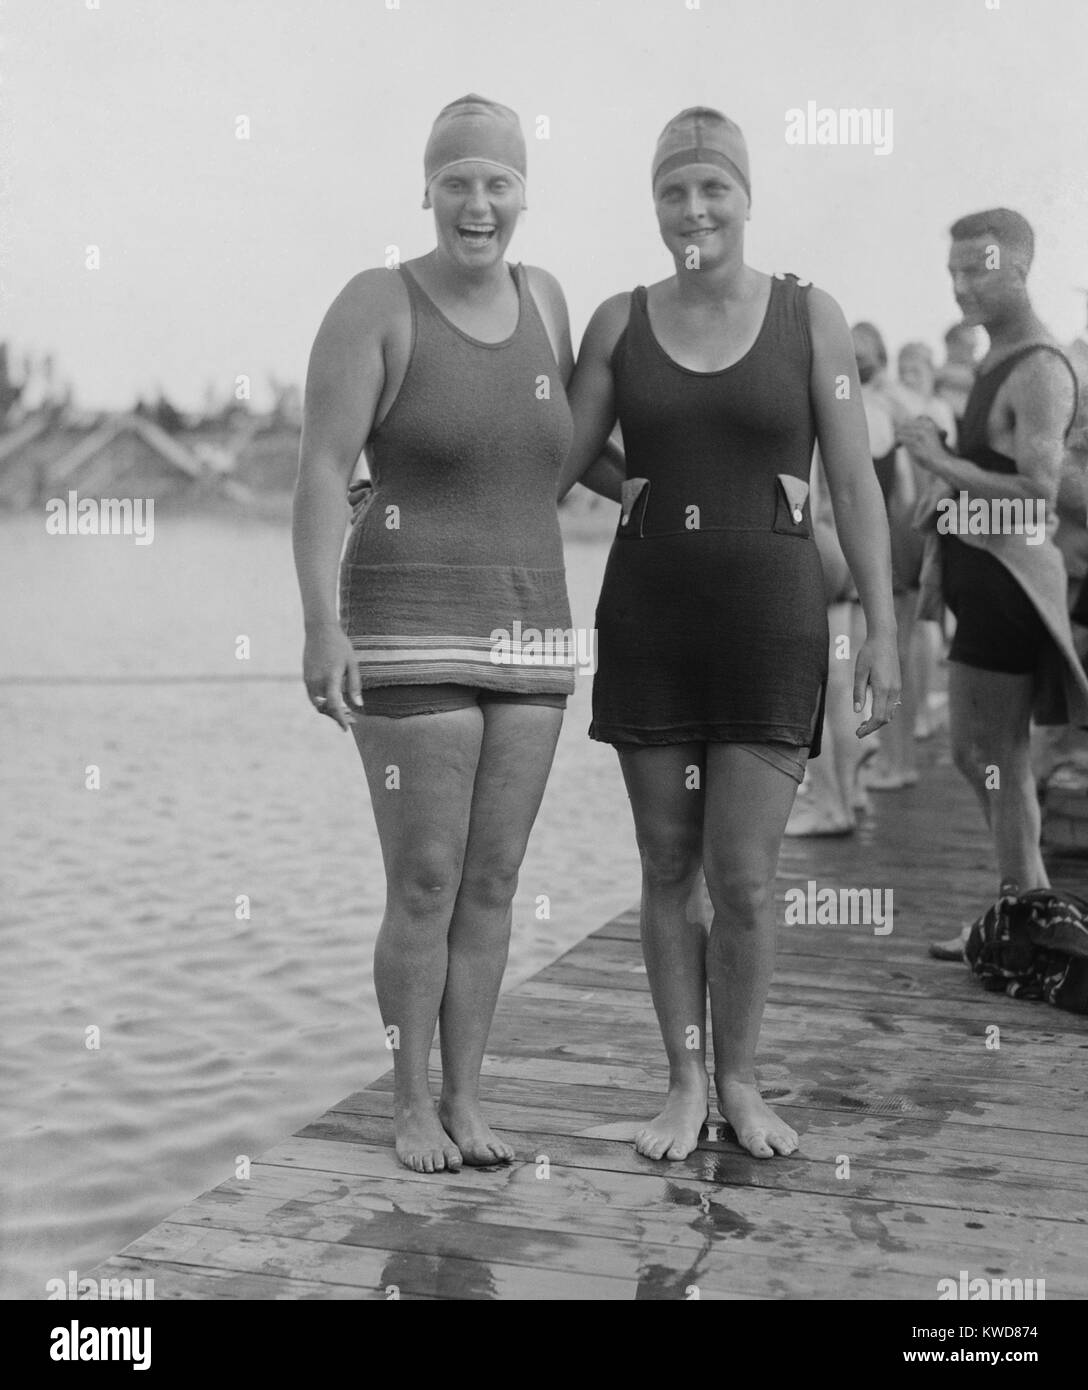 1920 Olympic Swimmers Charlotte Boyle and Ethelda Bleibtrey. Bleibtrey won gold medals in three freestyle events at the Antwerp Games in 1920. Boyle swam in the women's 100-meter freestyle. (BSLOC 2015 17 136) Stock Photo